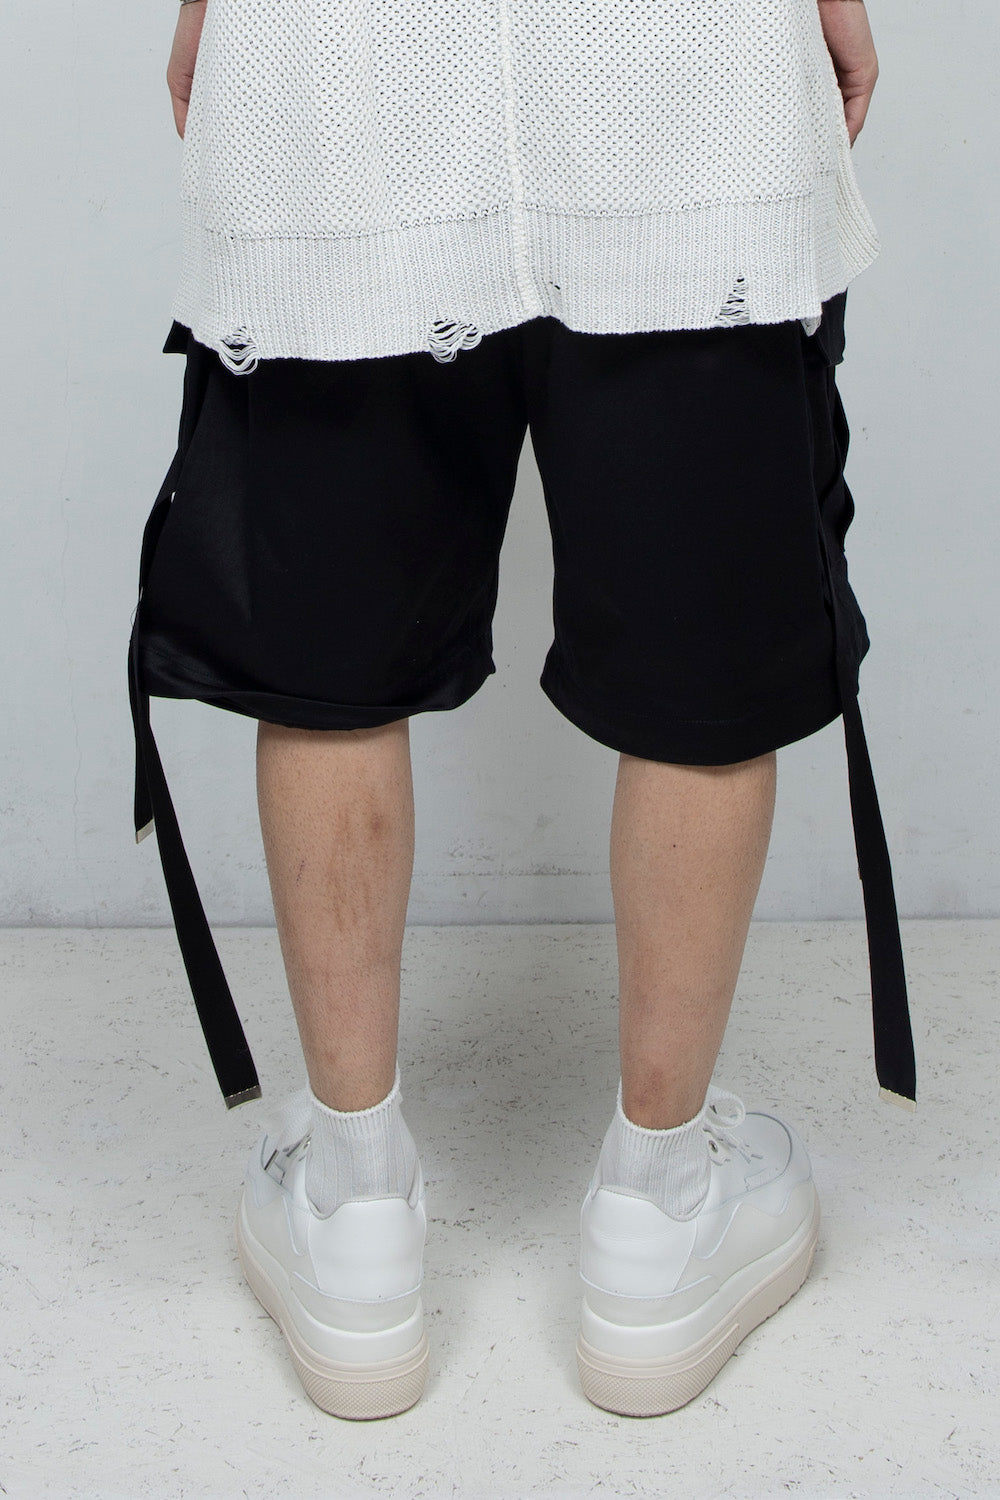 *Limited Edition* LBLM-SHOES02 | Combination Platform Sneakers | OFF WHITE